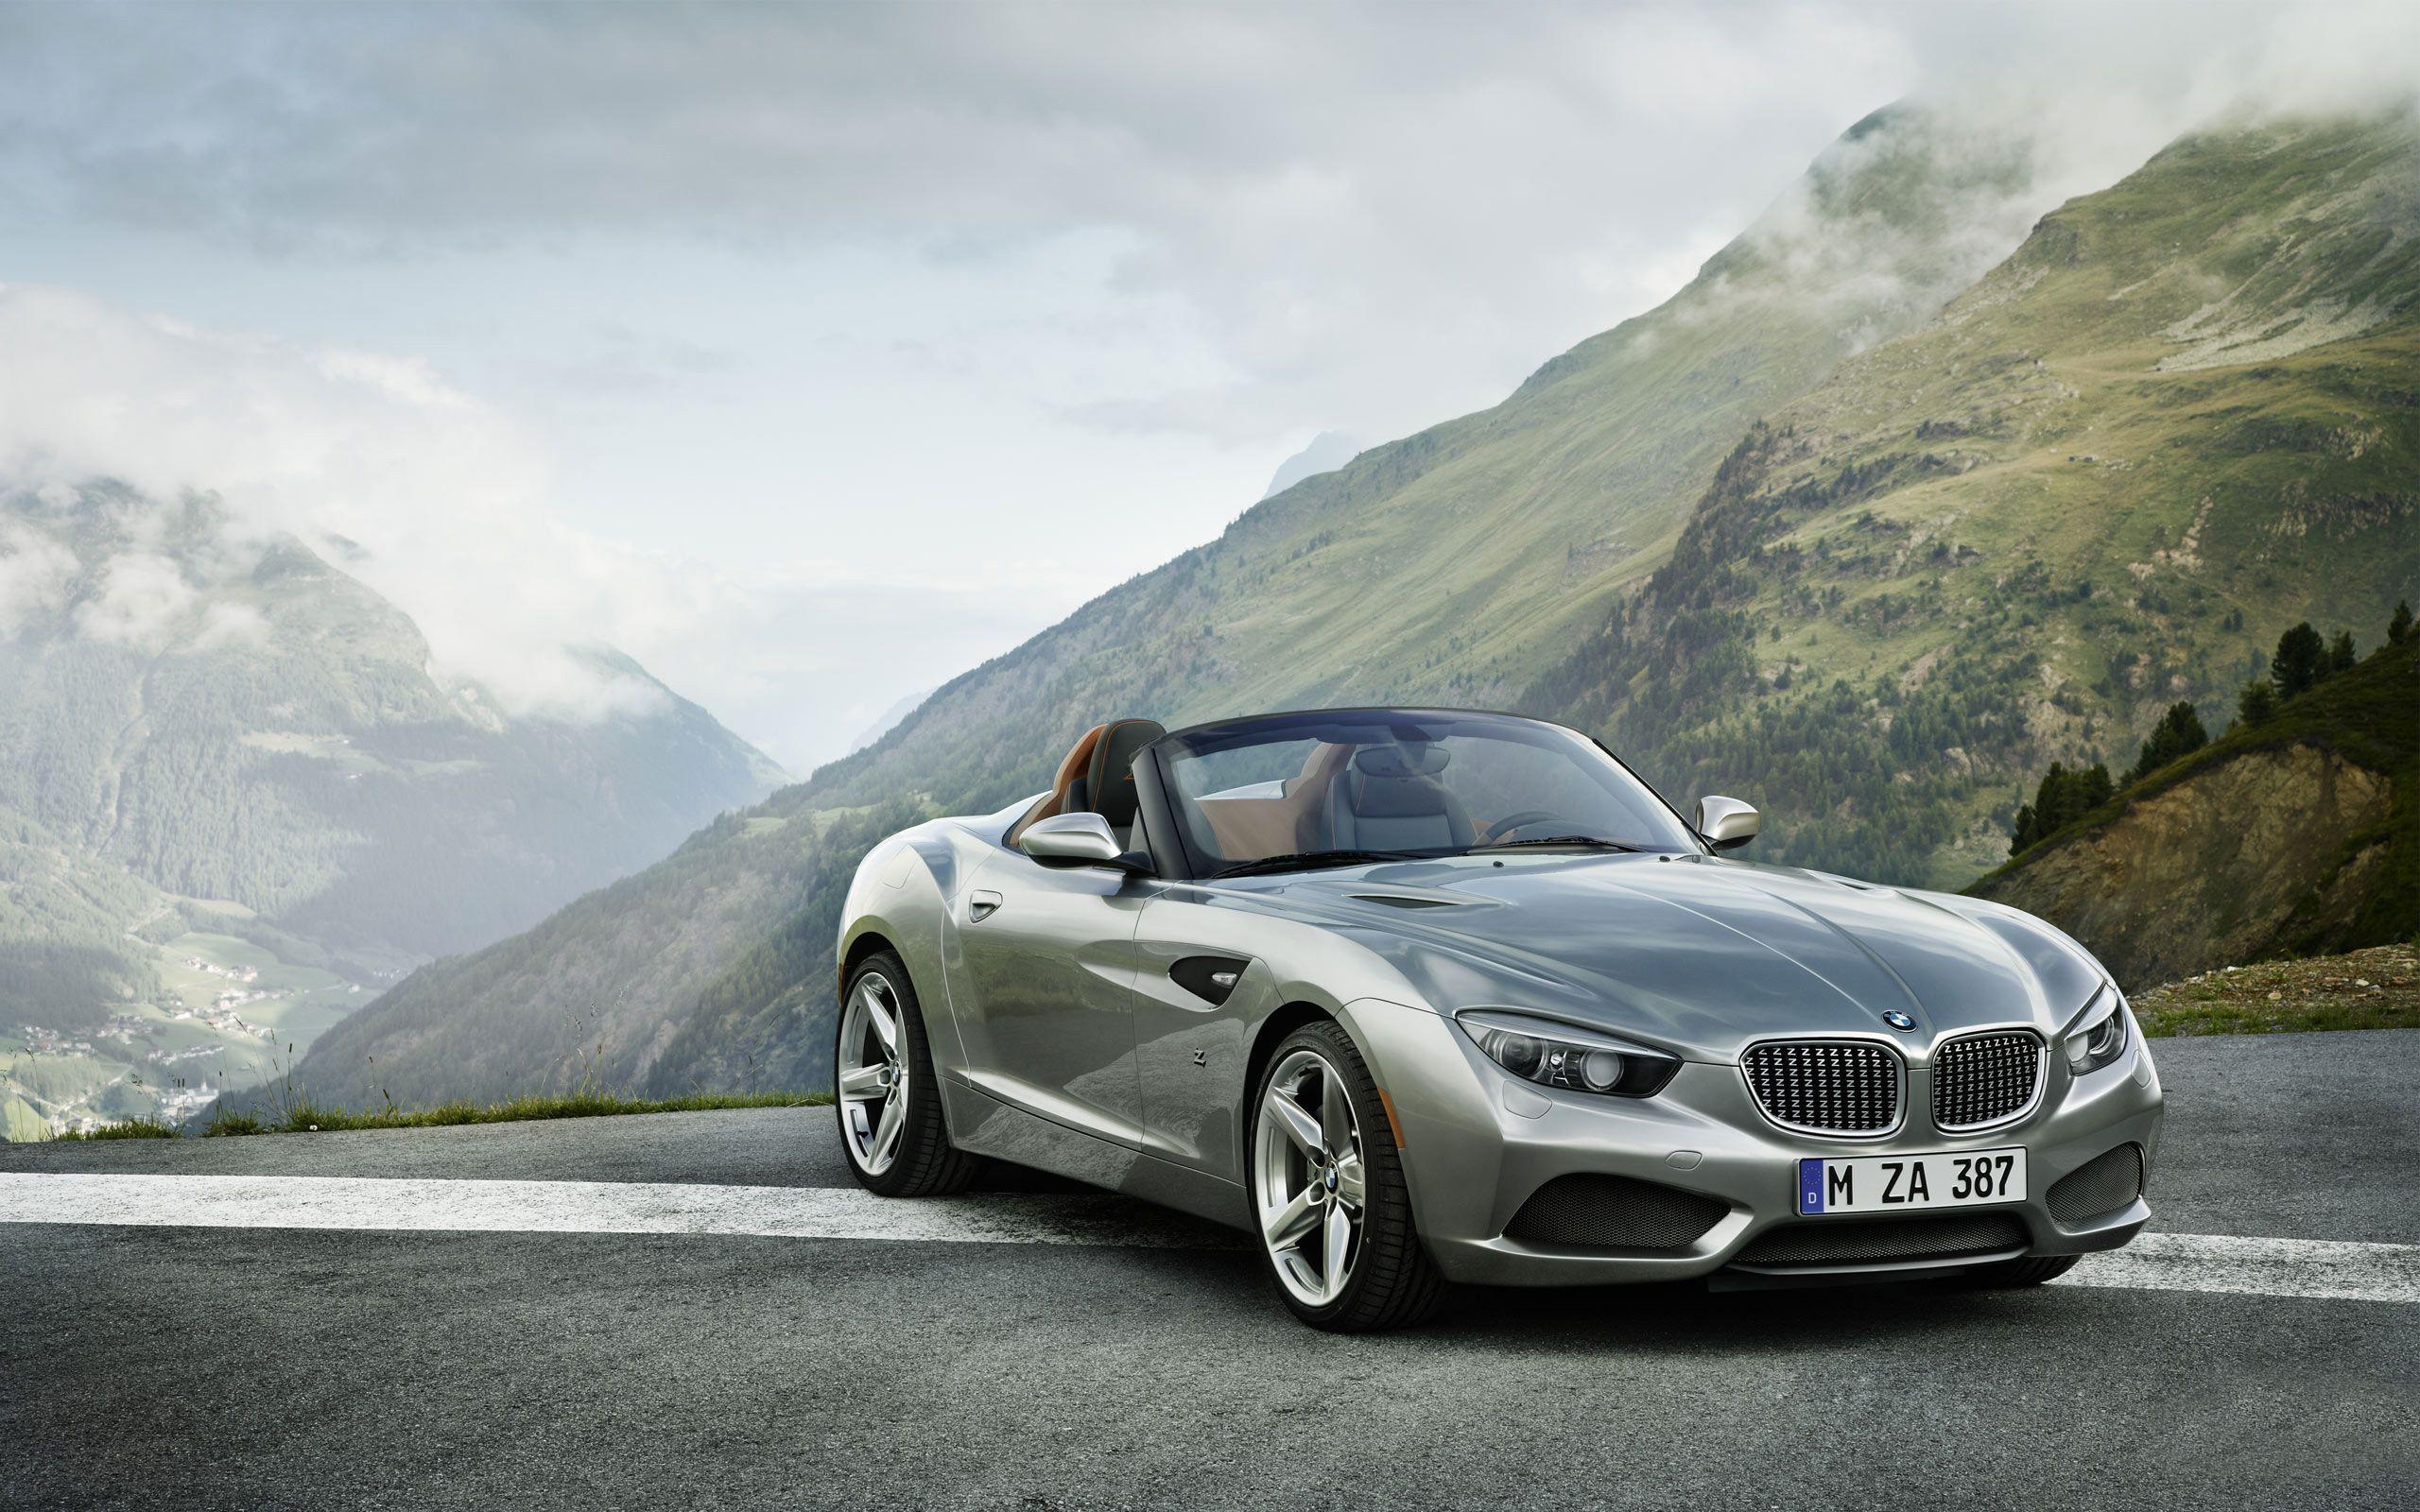 BMW Car Wallpaper, Full HDQ BMW Car Picture and Wallpaper